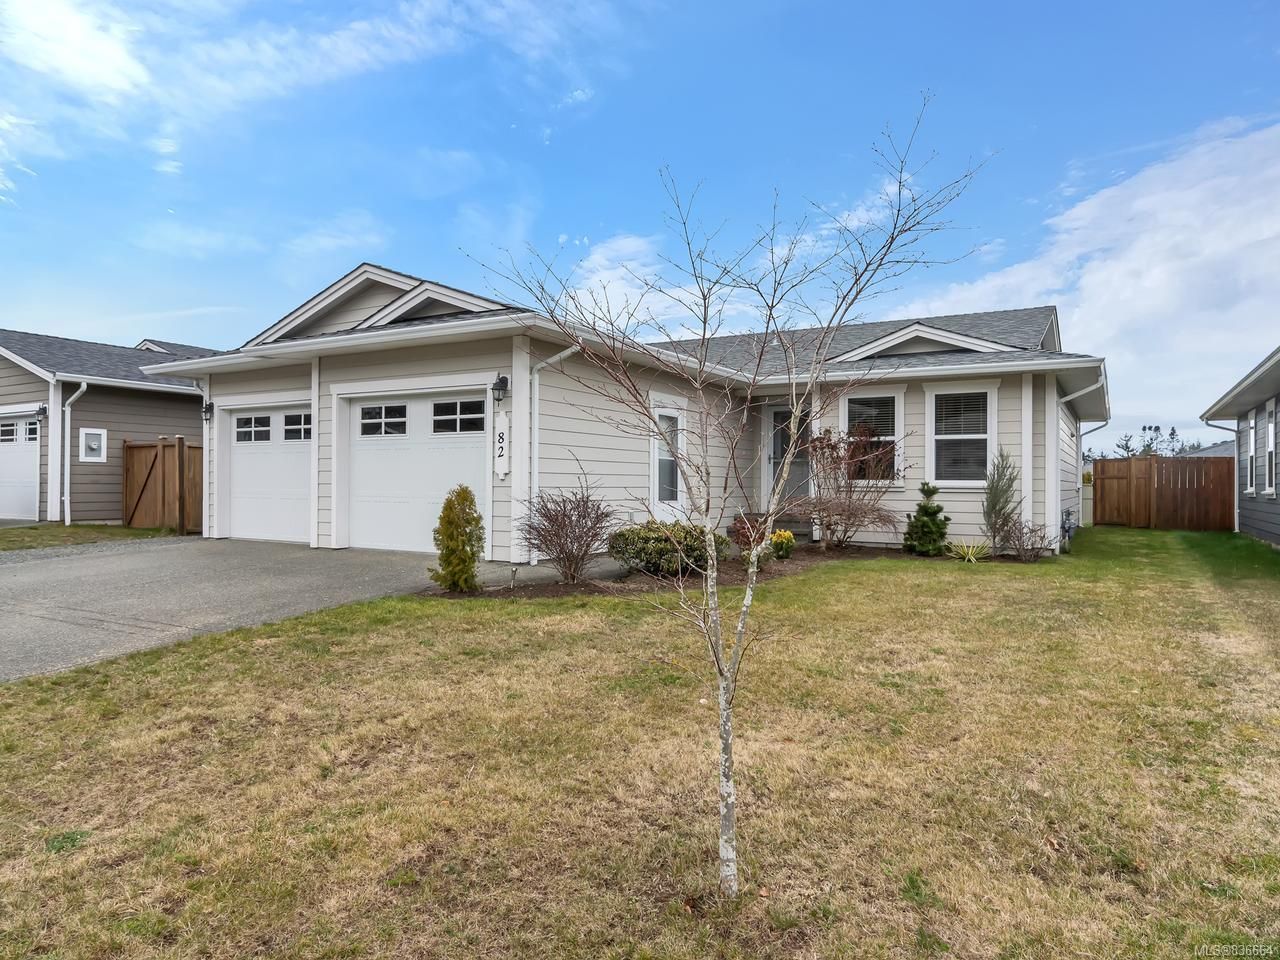 Main Photo: 82 STRATHCONA Way in CAMPBELL RIVER: CR Willow Point House for sale (Campbell River)  : MLS®# 836664